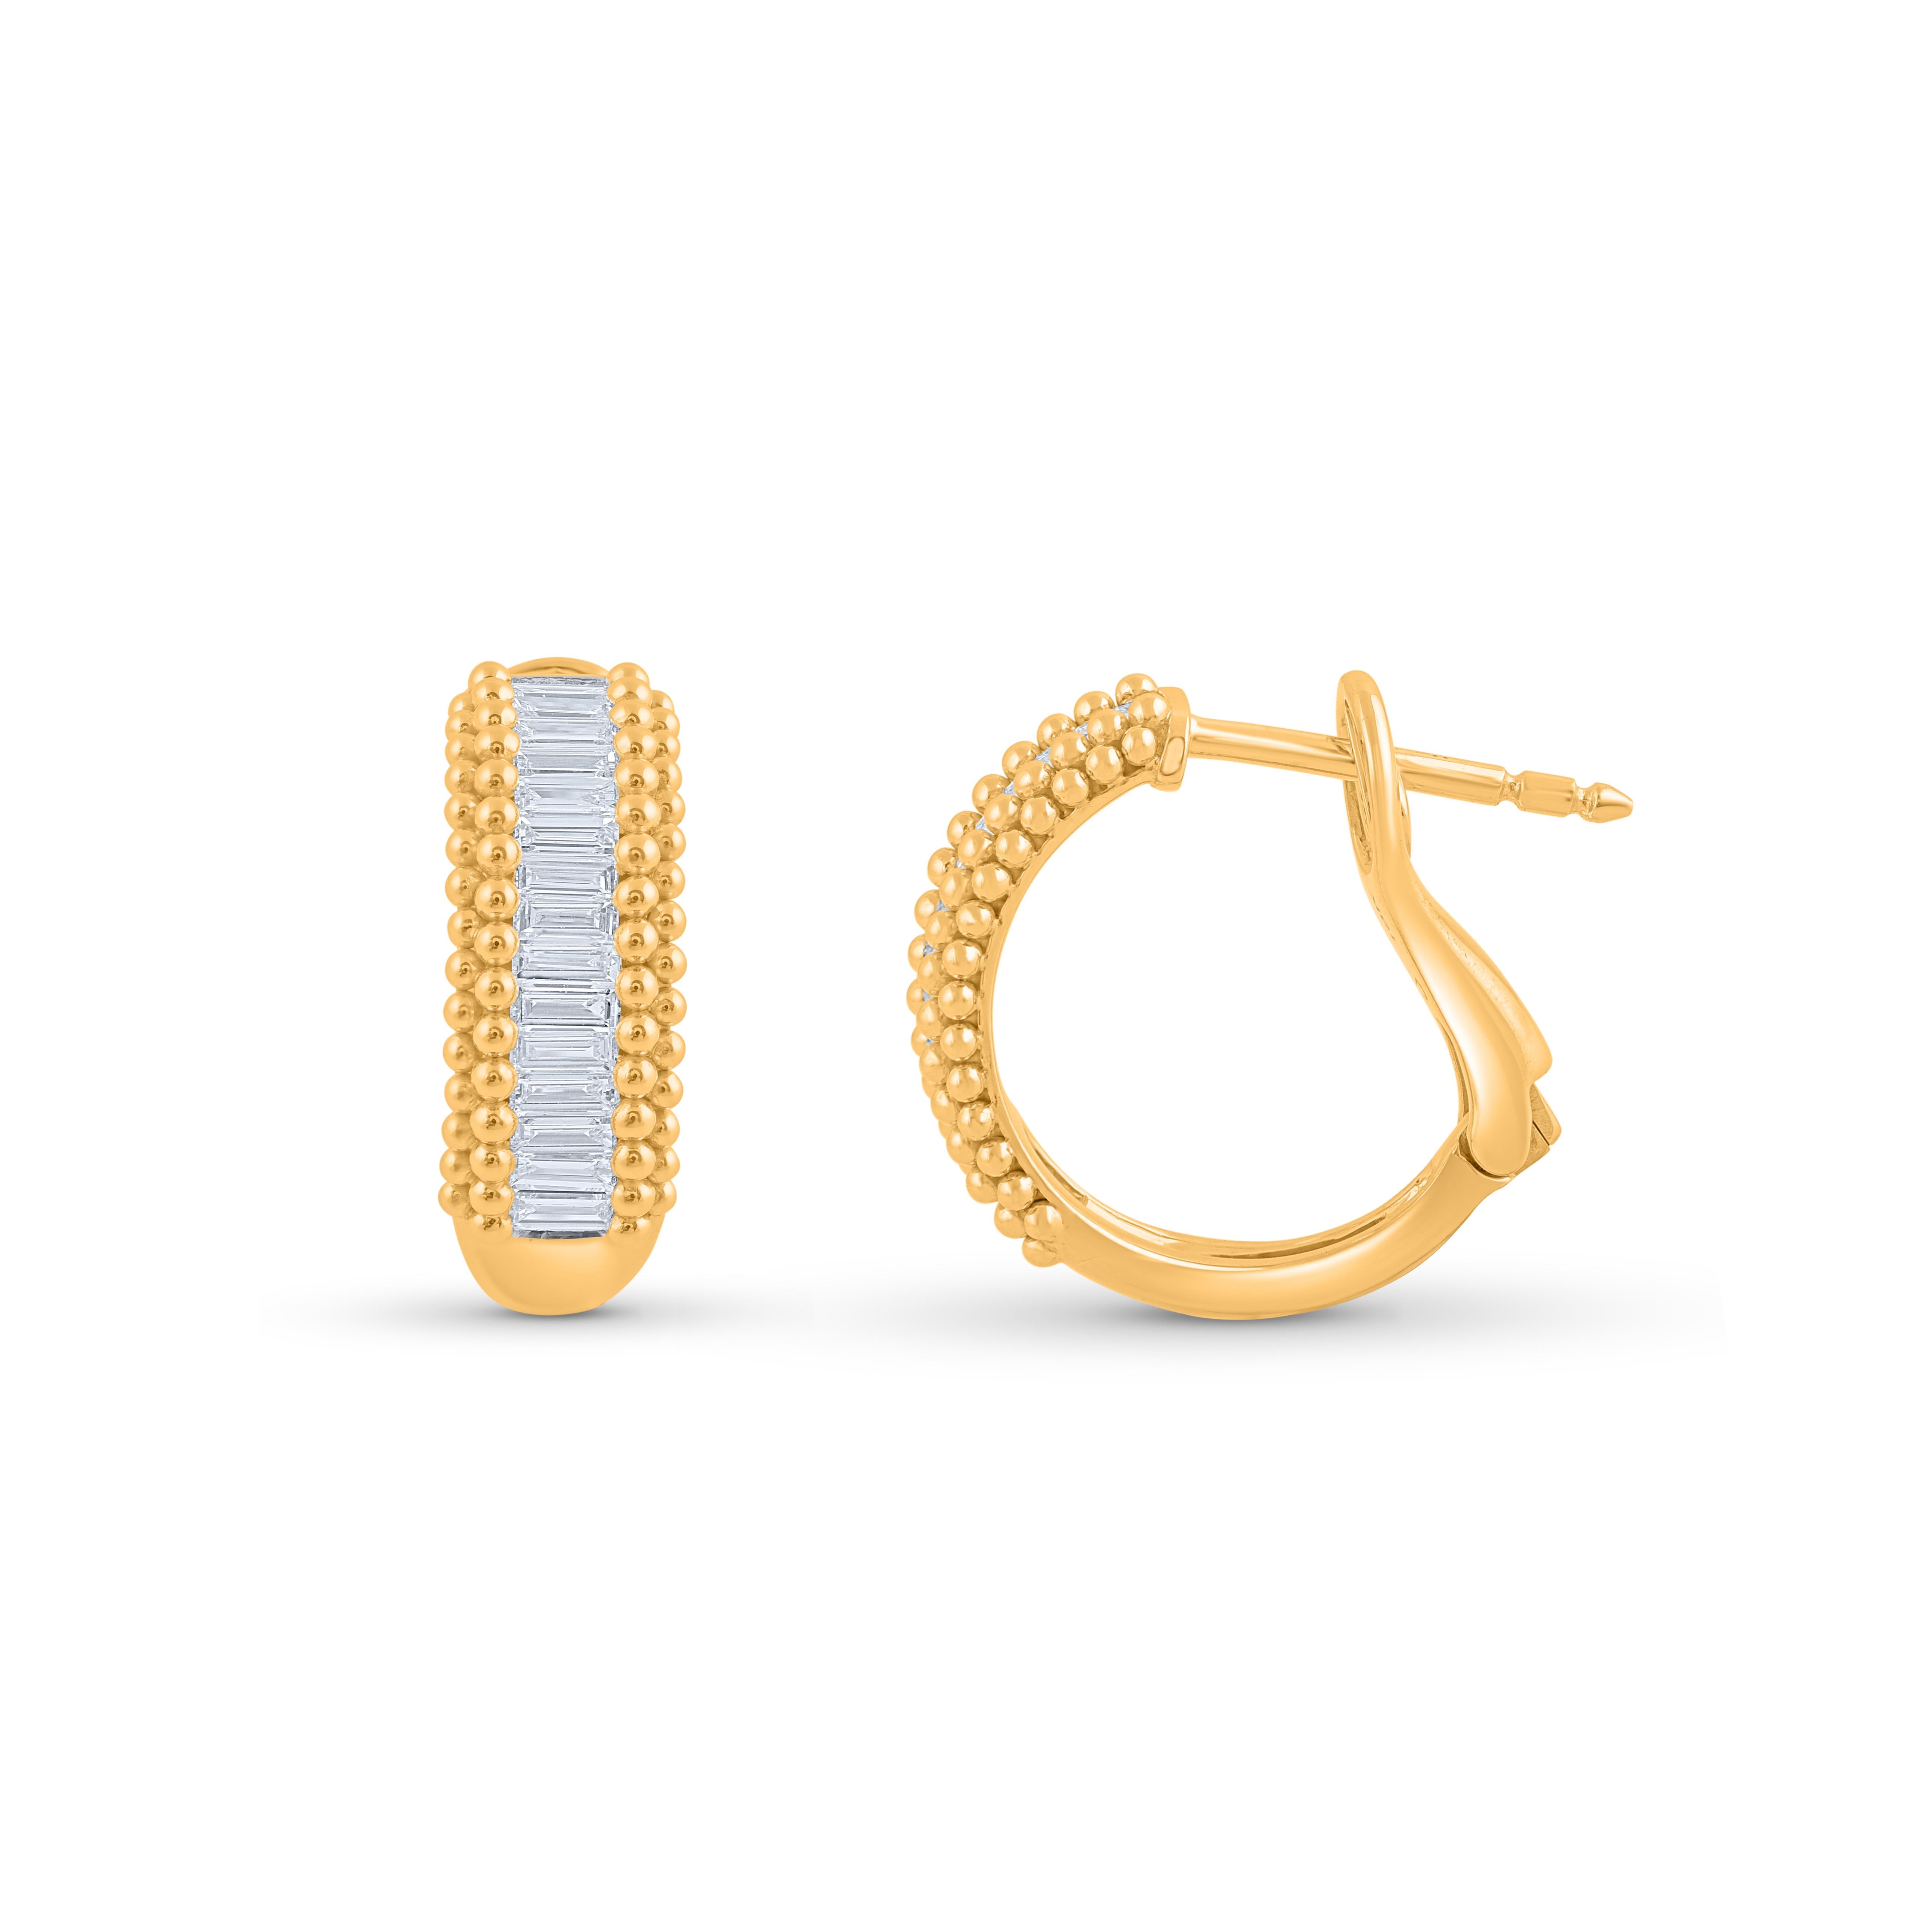 Studded with 28 baguette diamonds, these earrings are made by selective skilled artisans. HARAKH proudly supports these local artisans and is pleased to present this in modern discerning designs.

Each little bead takes a minimum of 20 minutes to